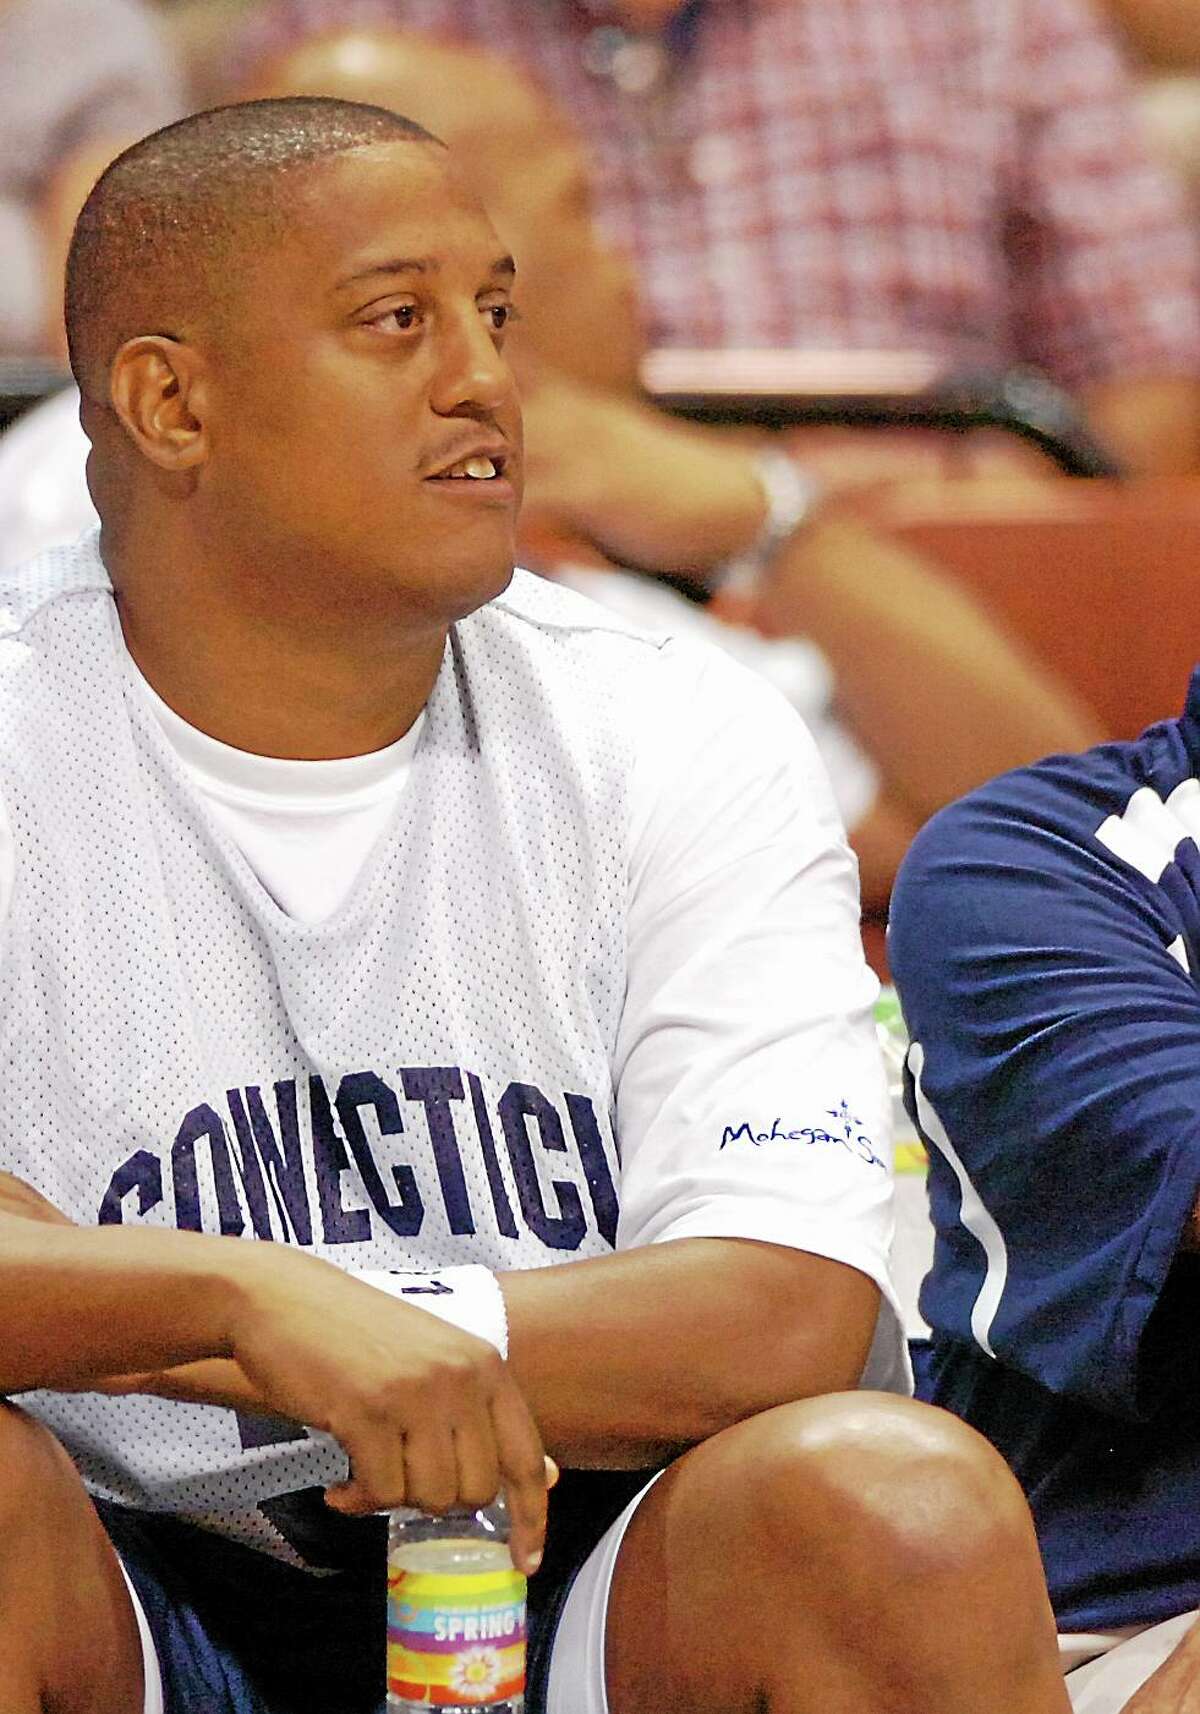 This Aug. 8, 2008 photo shows former NBA and University of Connecticut player Tate George during the Jim Calhoun Celebrity Classic basketball game at the Mohegan Sun Arena in Uncasville, Conn. A federal jury convicted C. Tate George on four counts of wire fraud last fall.